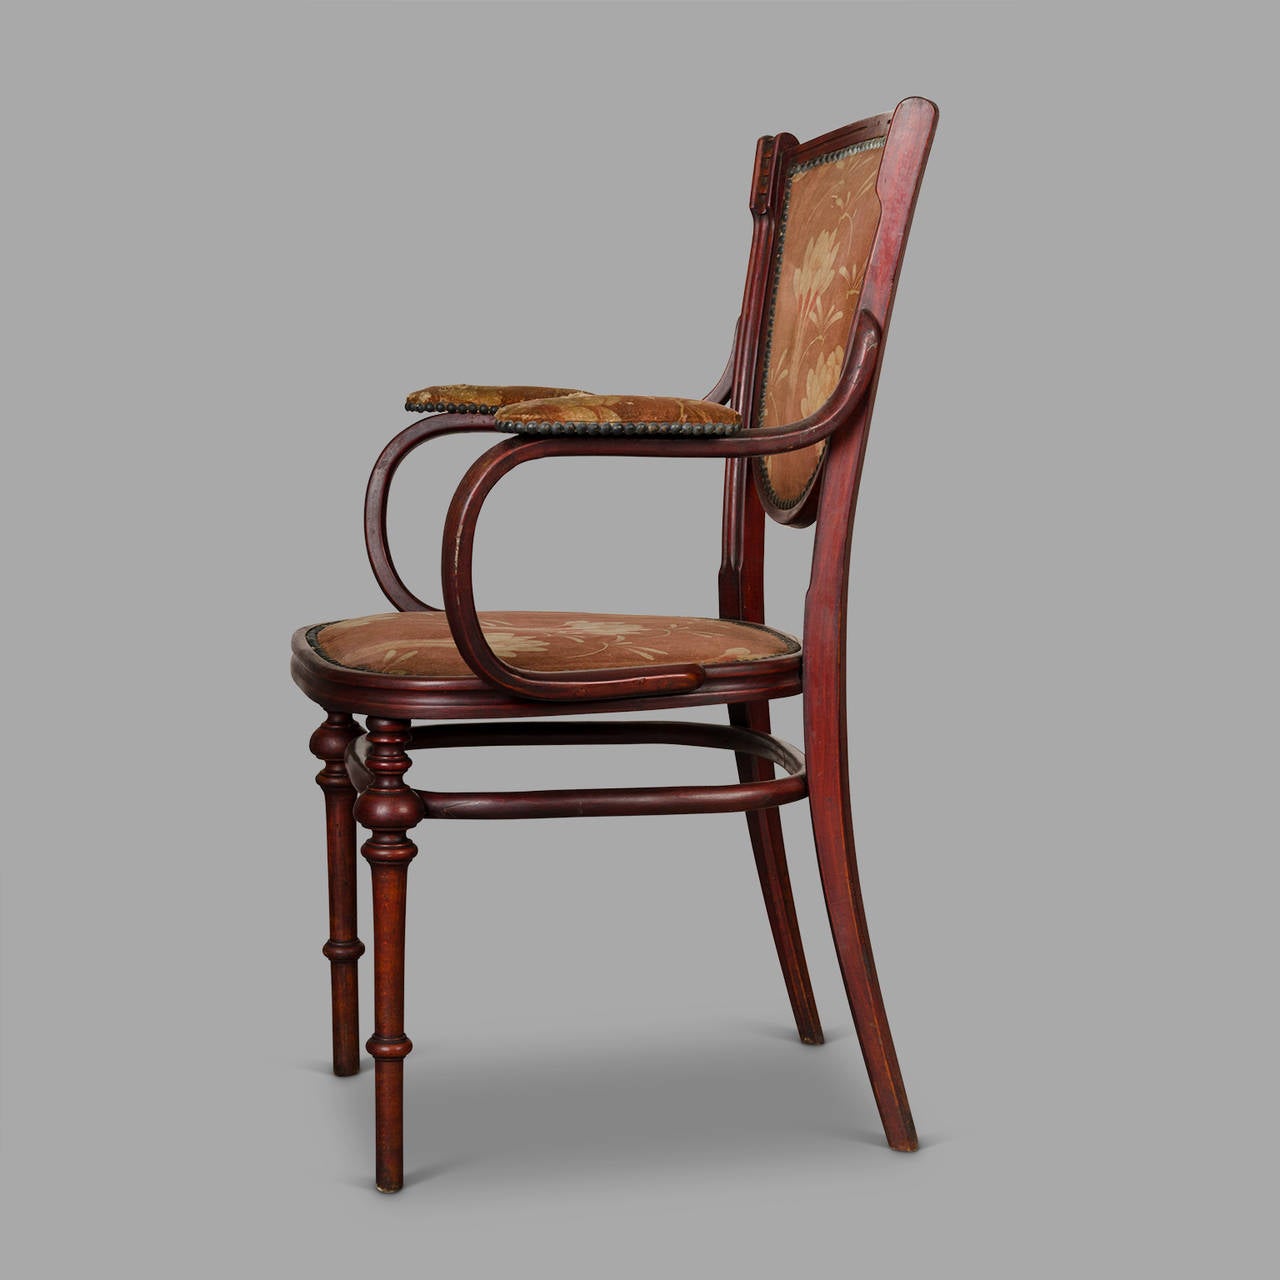 20th Century Small Art Nouveau Period Living Room Chairs, circa 1900